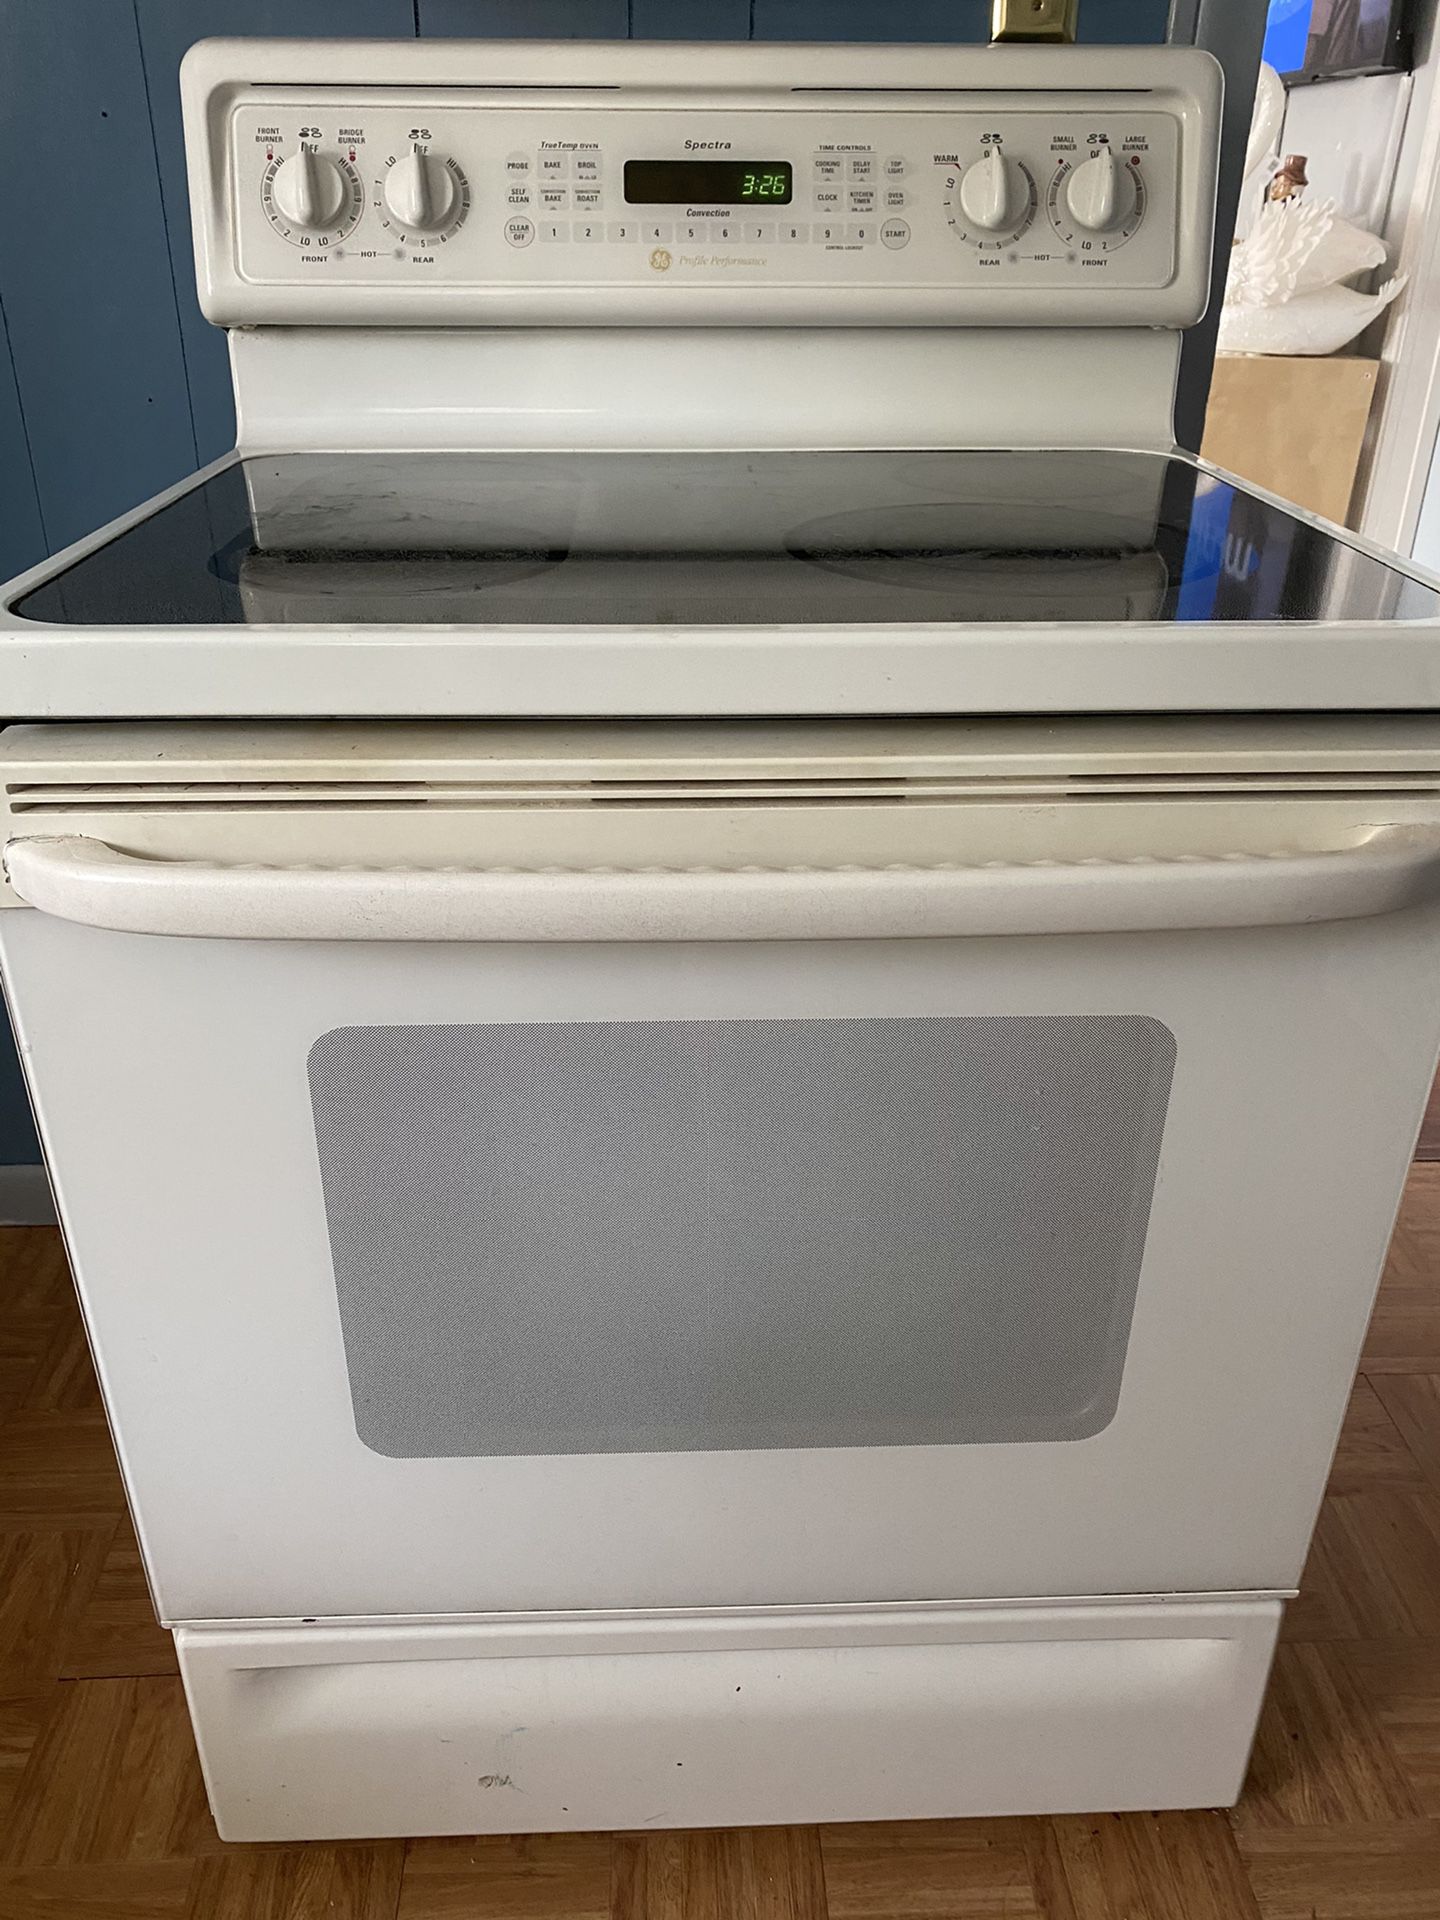 30” GE Glass Top Stove MUST PICKUP